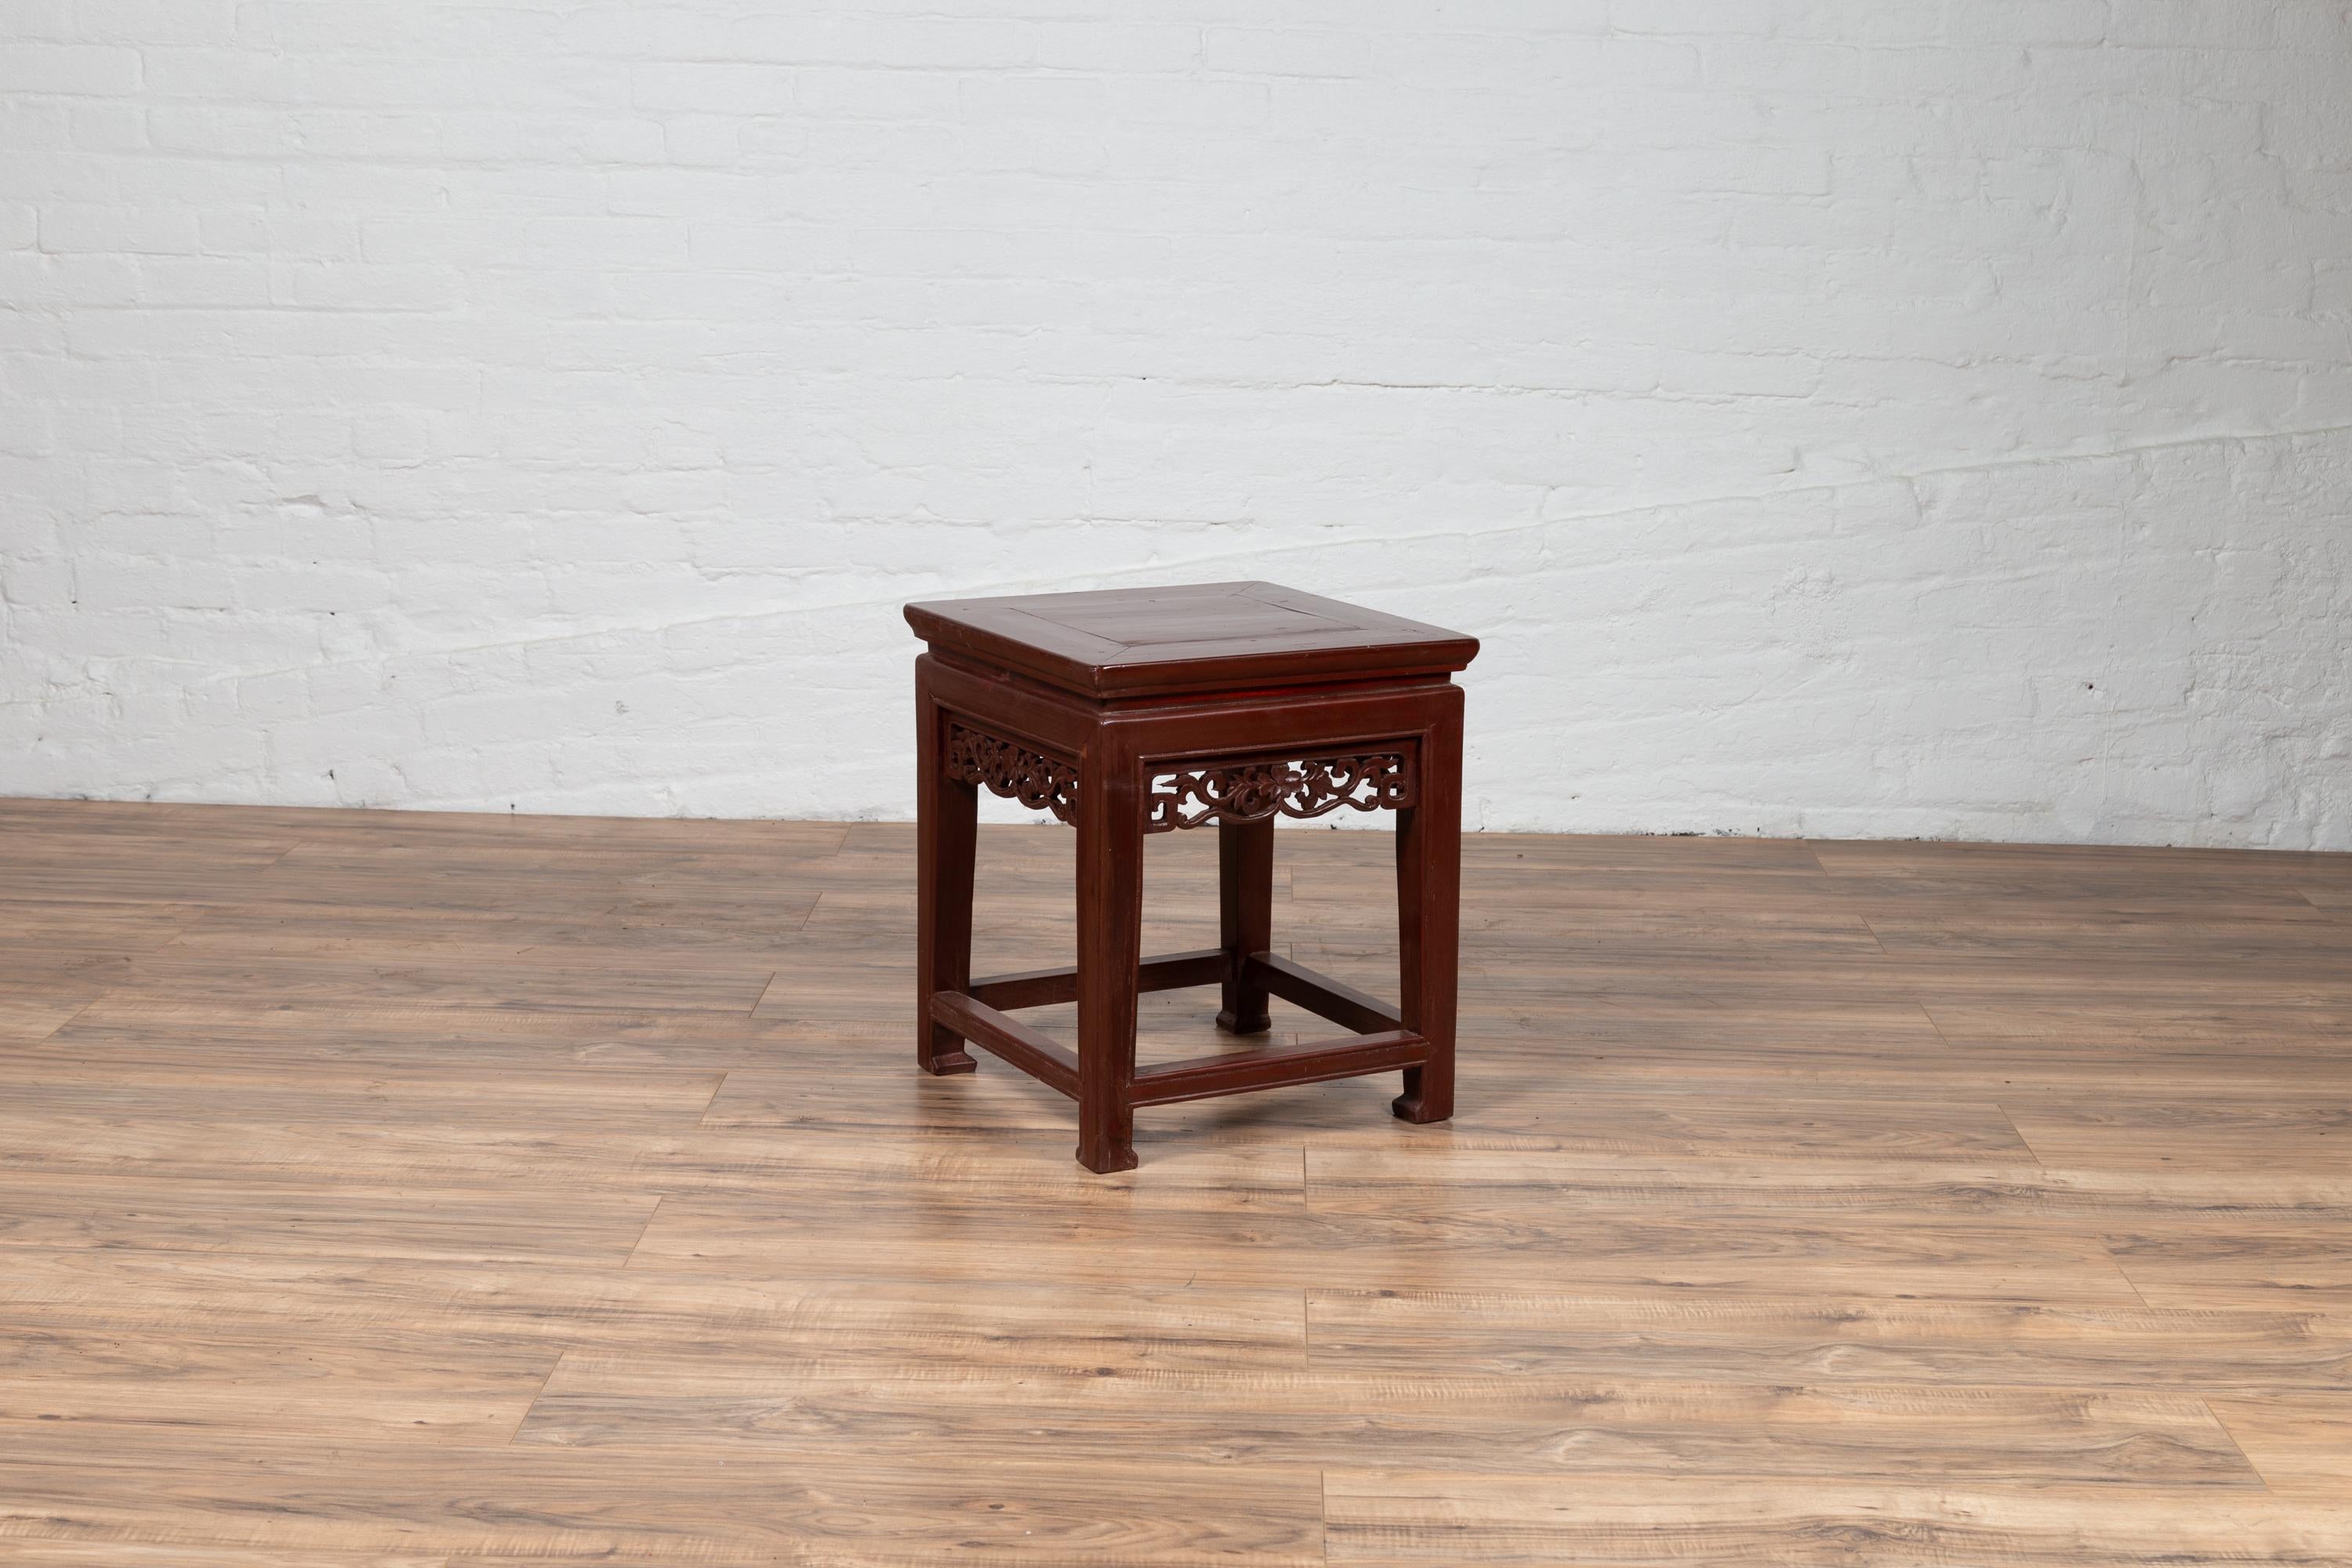 Antique Chinese Waisted Stool with Dark Red Patina and Foliage Hand Carved Apron For Sale 2